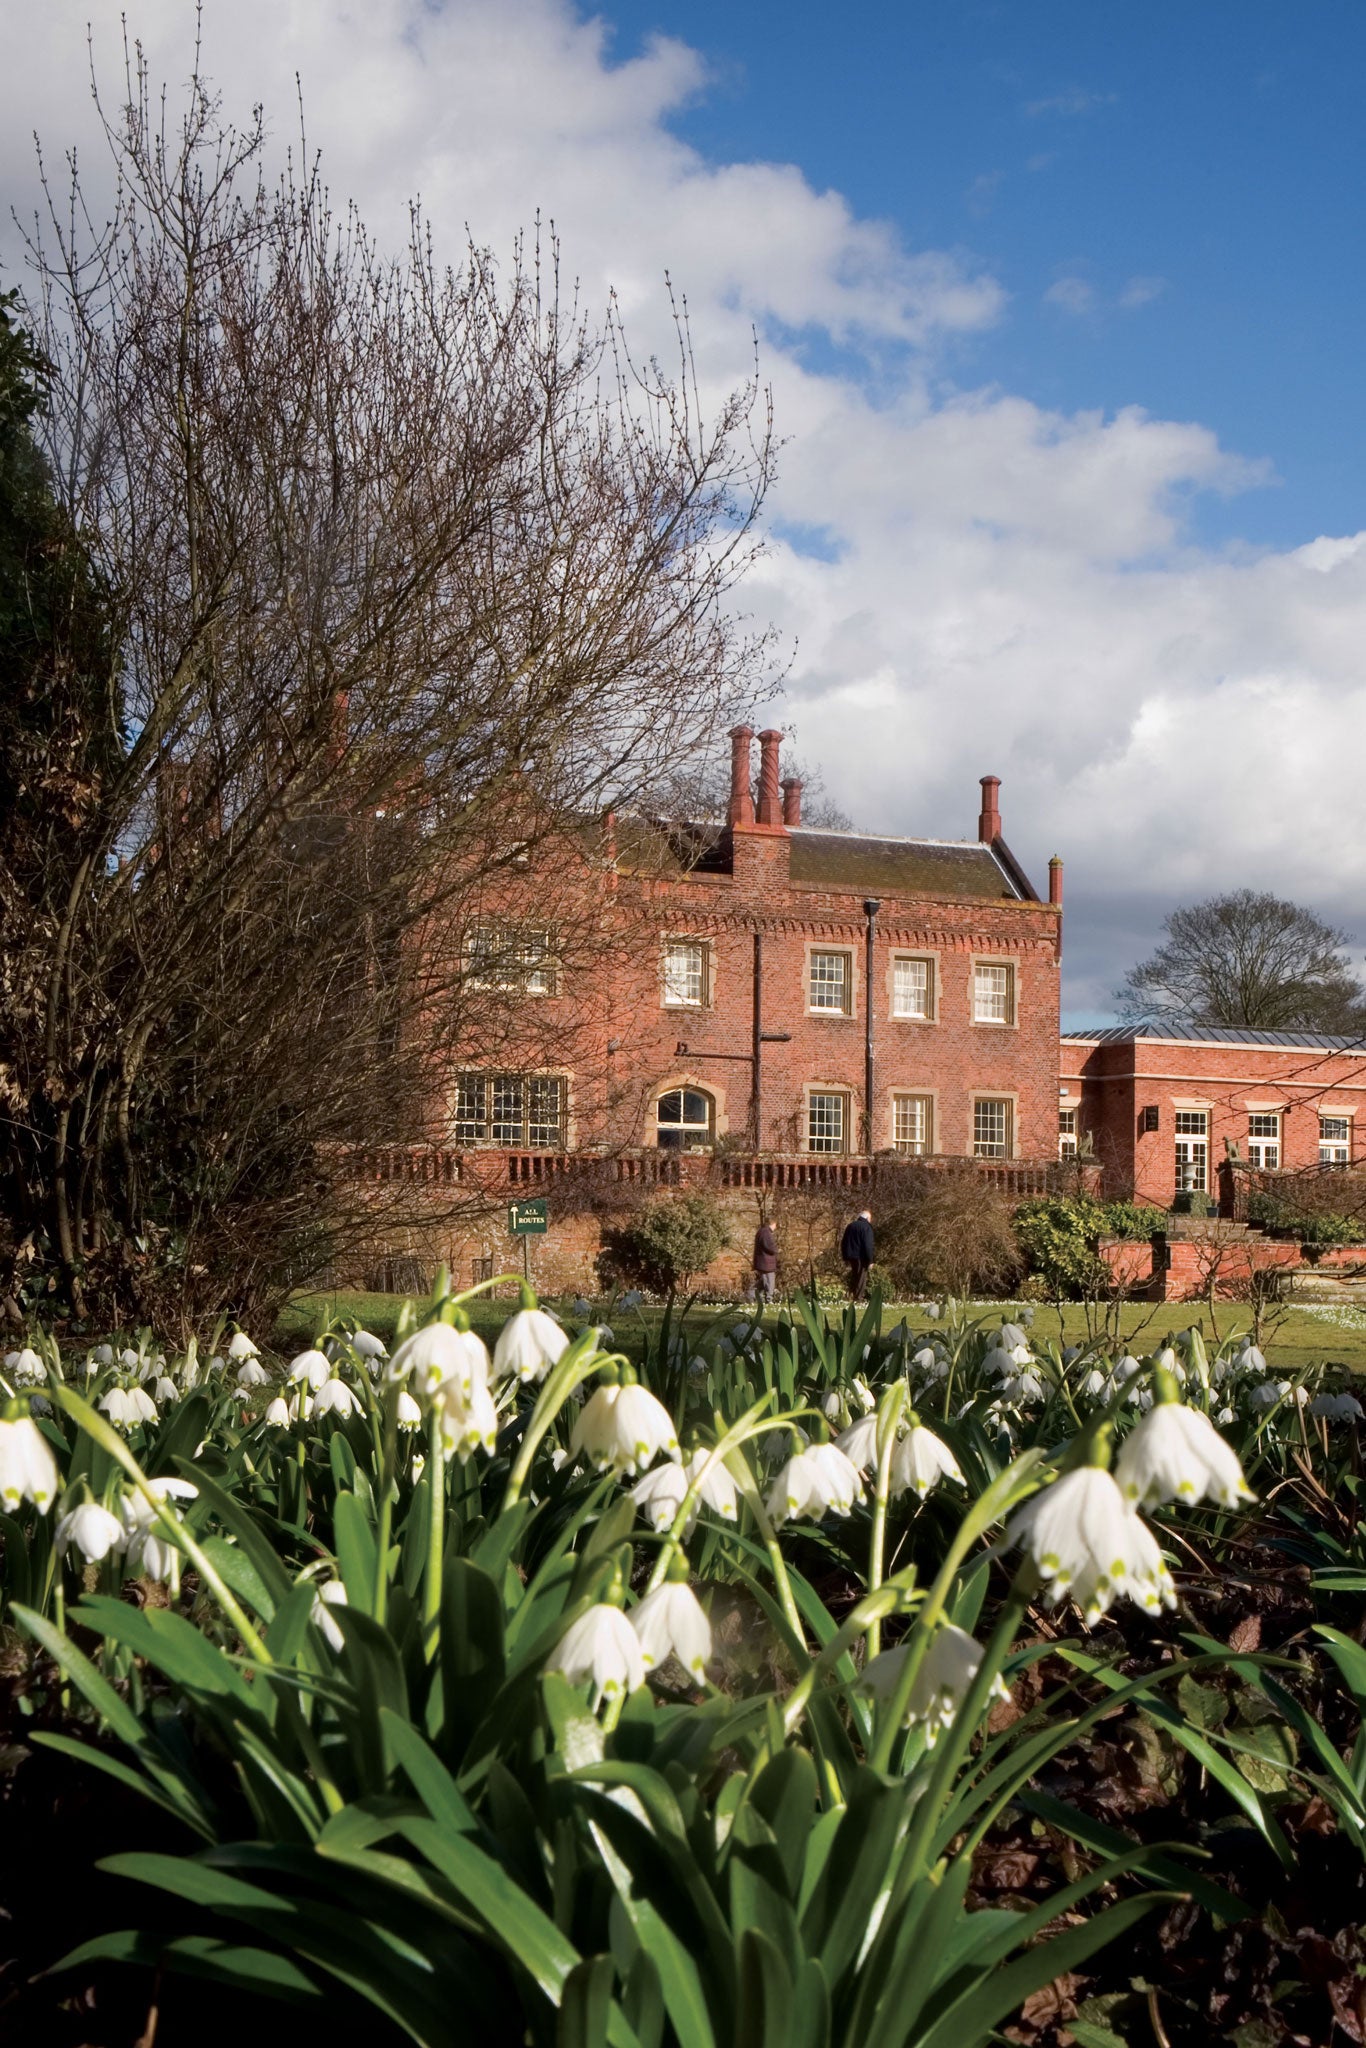 In full bloom: The snowdrops at Hodsock Priory